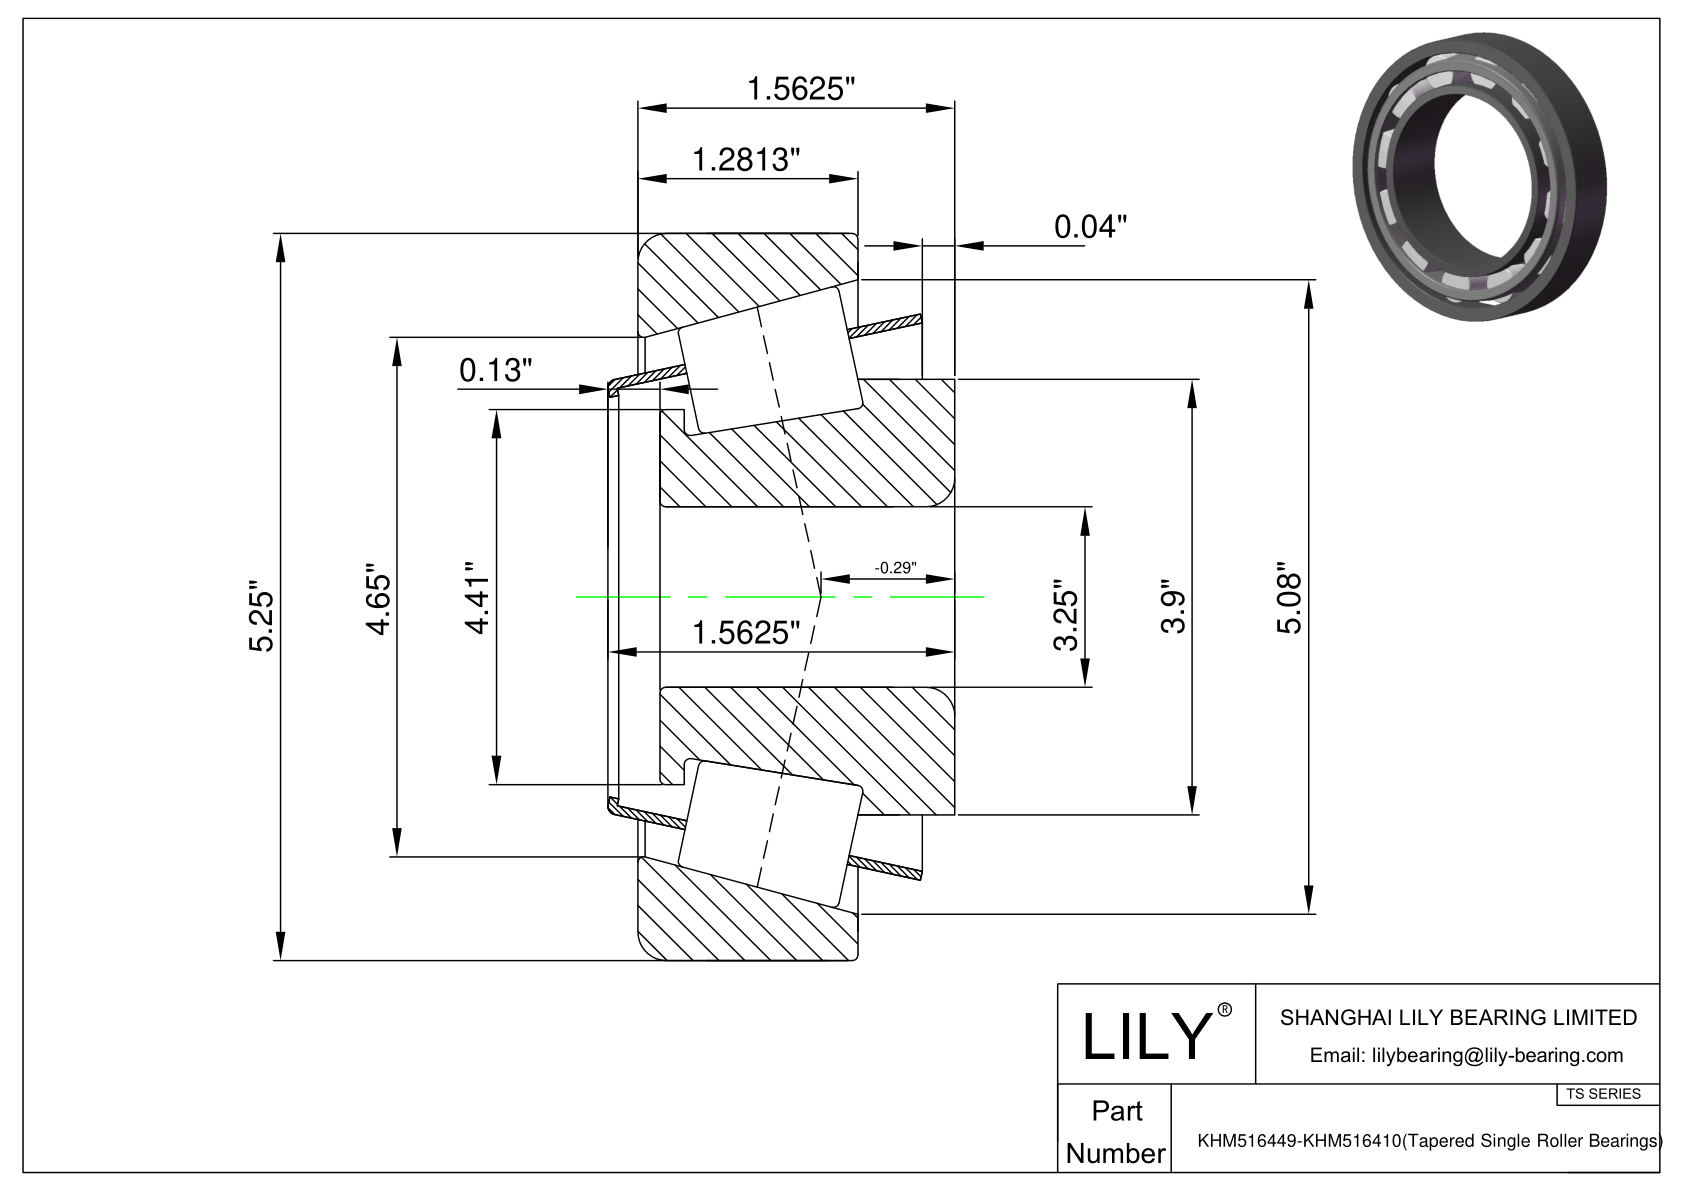 KHM516449-KHM516410 TS (Tapered Single Roller Bearings) (Imperial) cad drawing